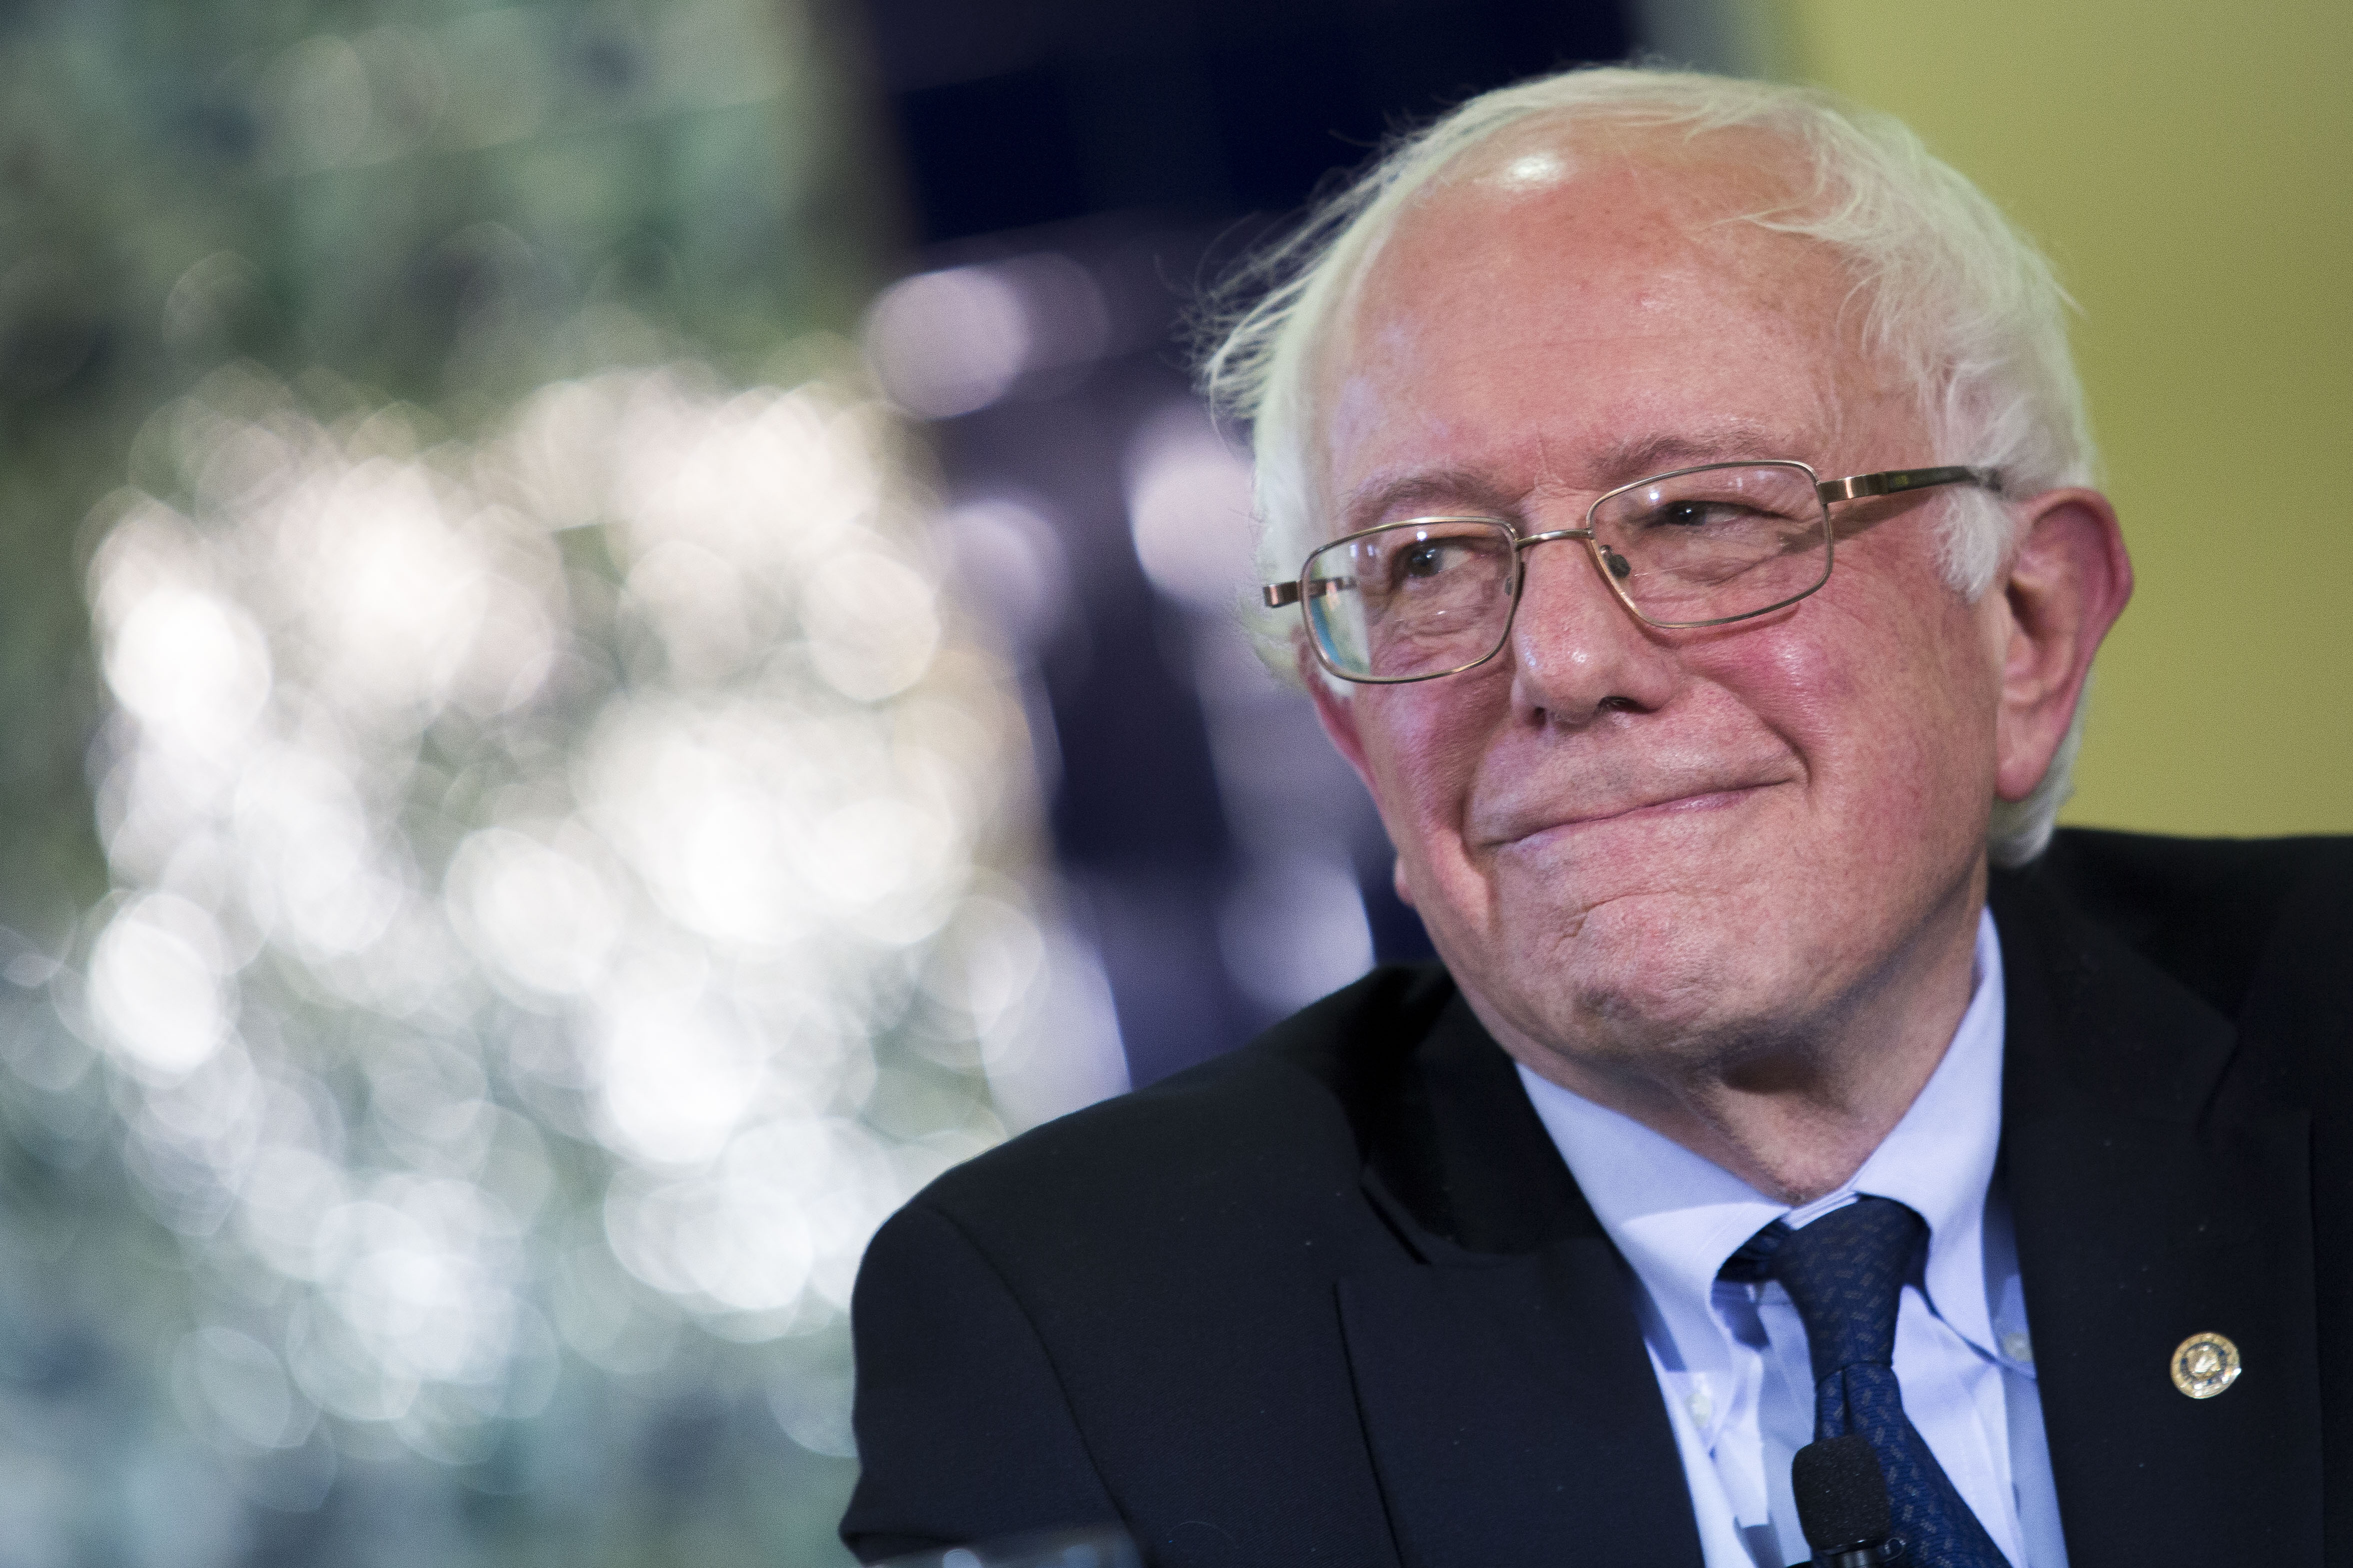 Bernie Sanders smiles during an interfaith roundtable in Washington, DC on Dec. 16, 2015. (Drew Angerer—Bloomberg/Getty Images)